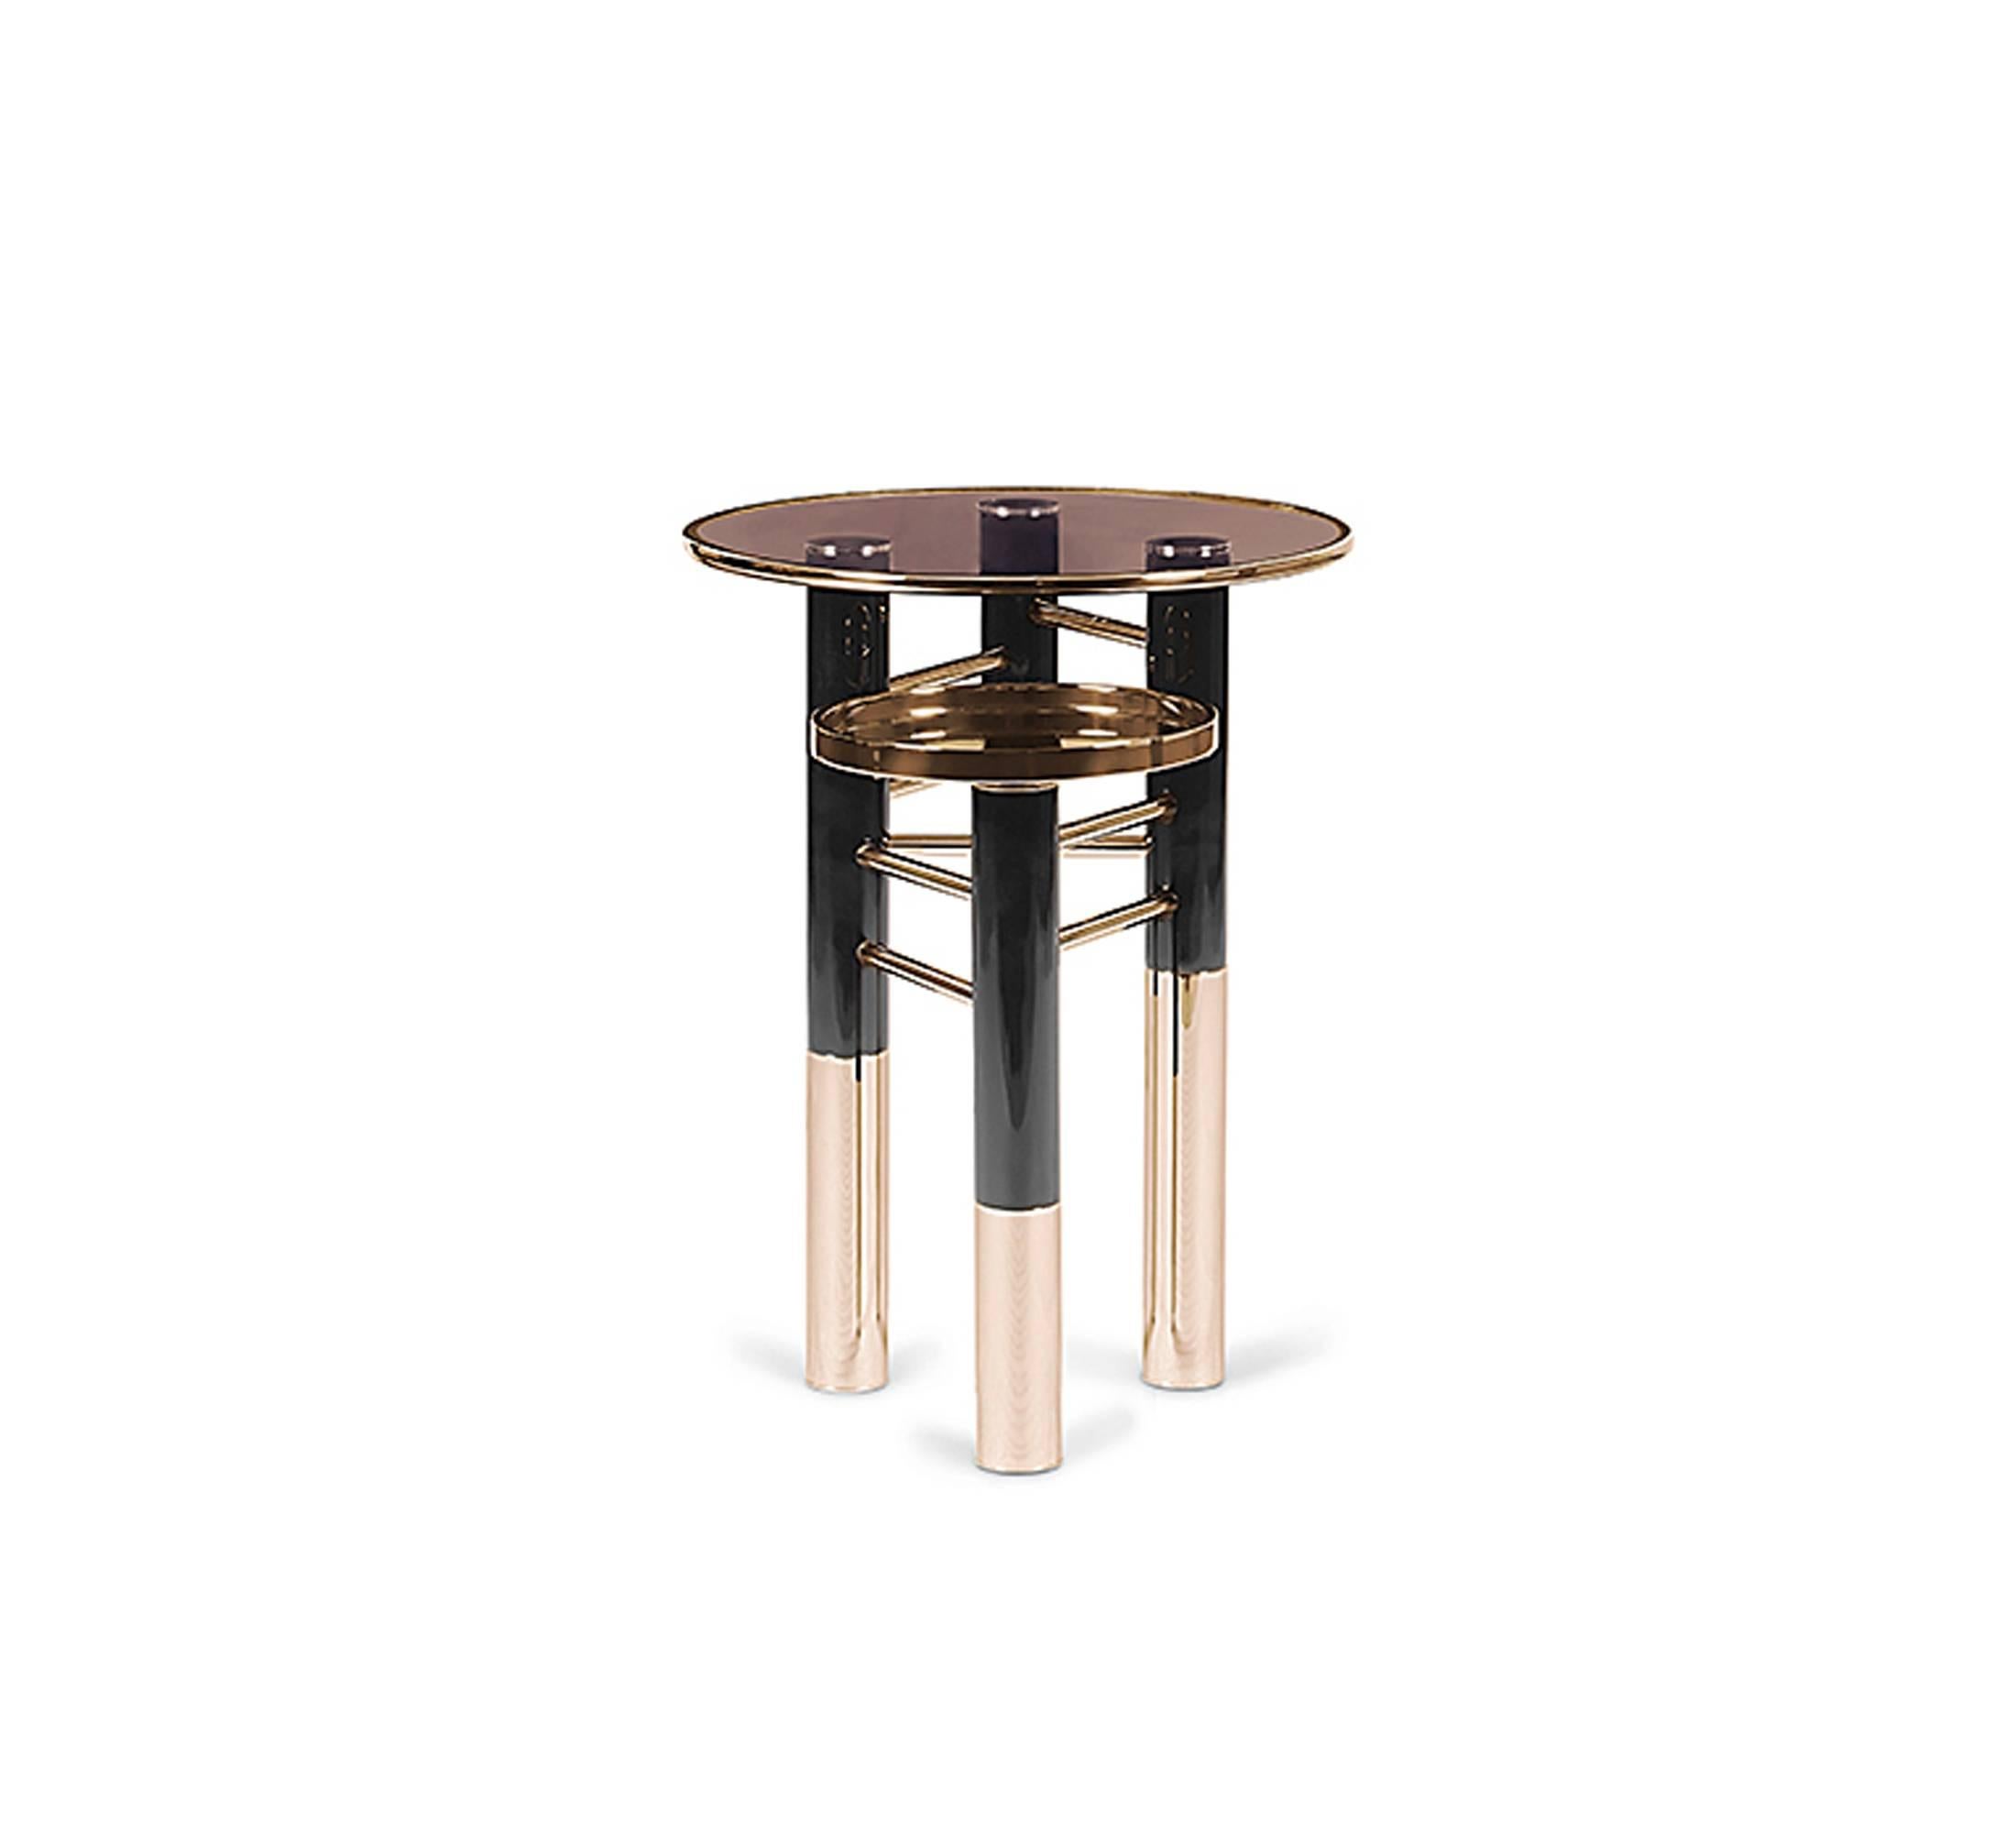 Side table united in stainless steel with brown glass top 
with gold trim and gold plated tray. Four neat gold plated, 
glossy black legs with brass tubes.
